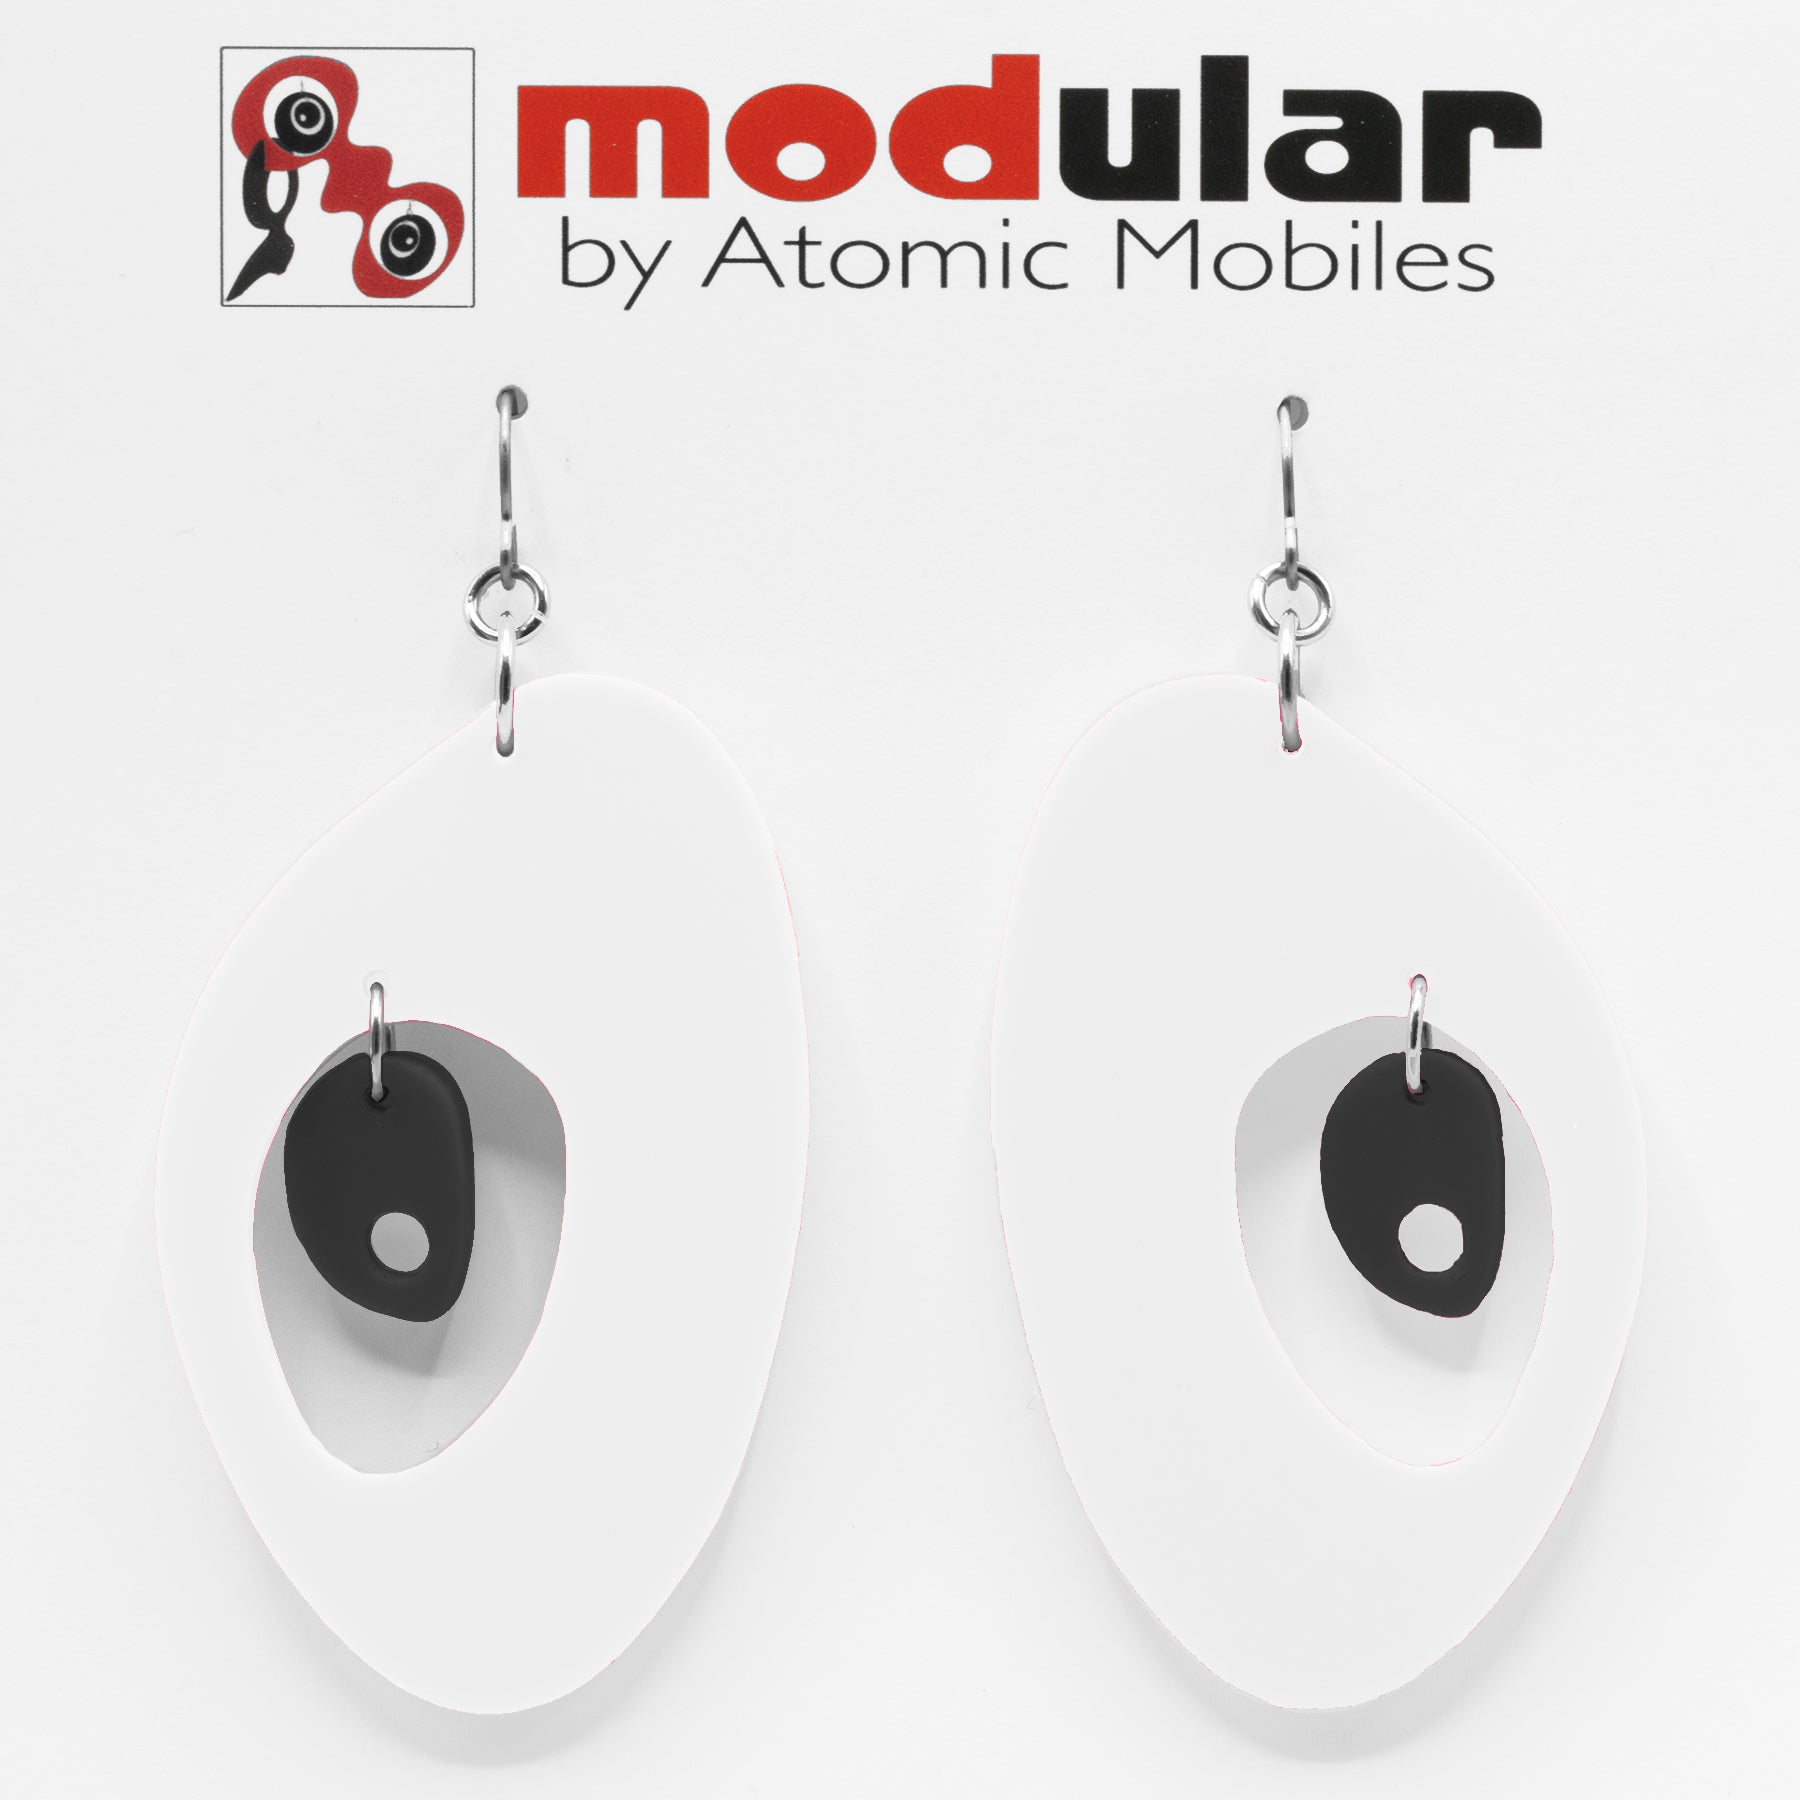 MODular Earrings - The Modernist Statement Earrings in White and Black by AtomicMobiles.com - retro era inspired mod handmade jewelry